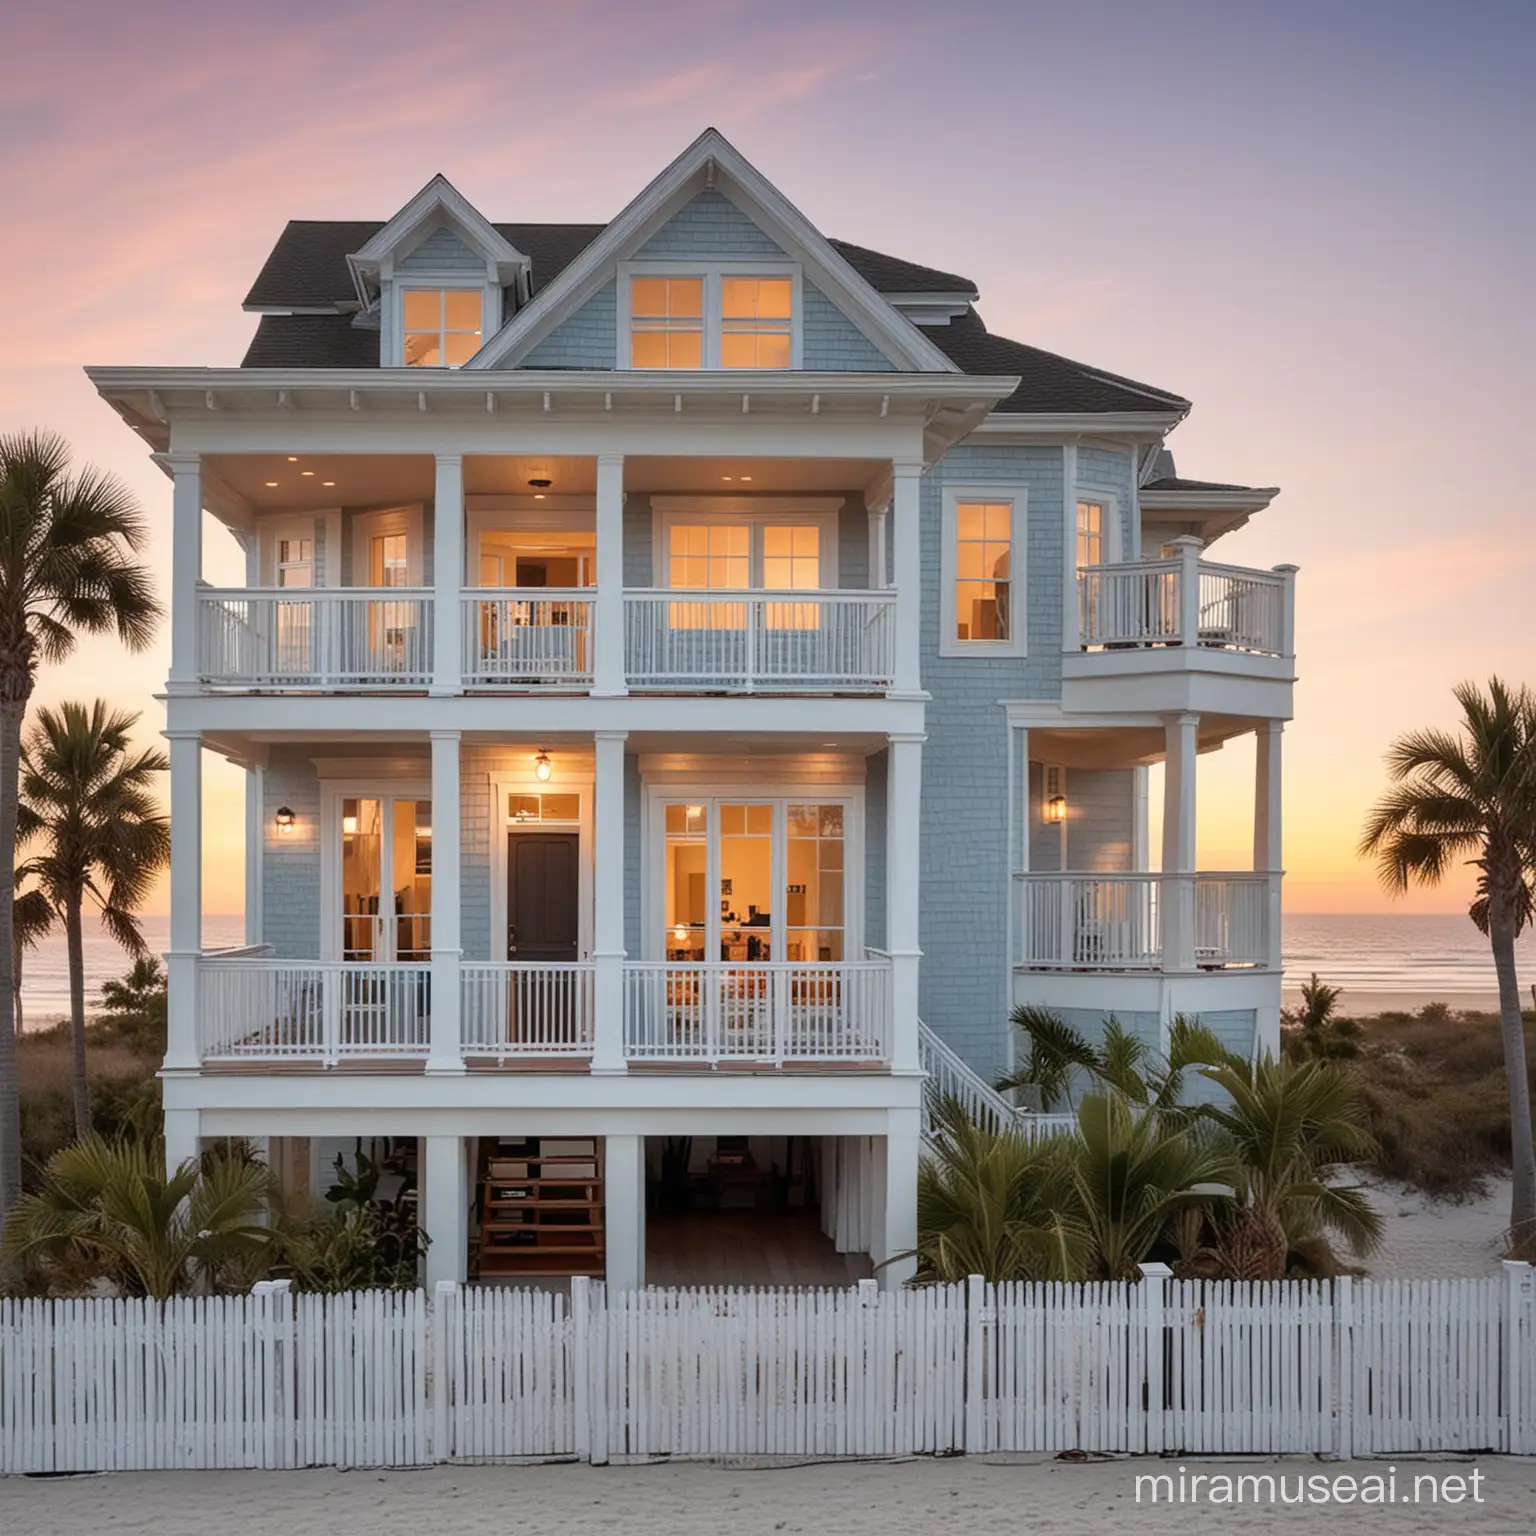 Picturesque TwoStory Beach House with Ocean View